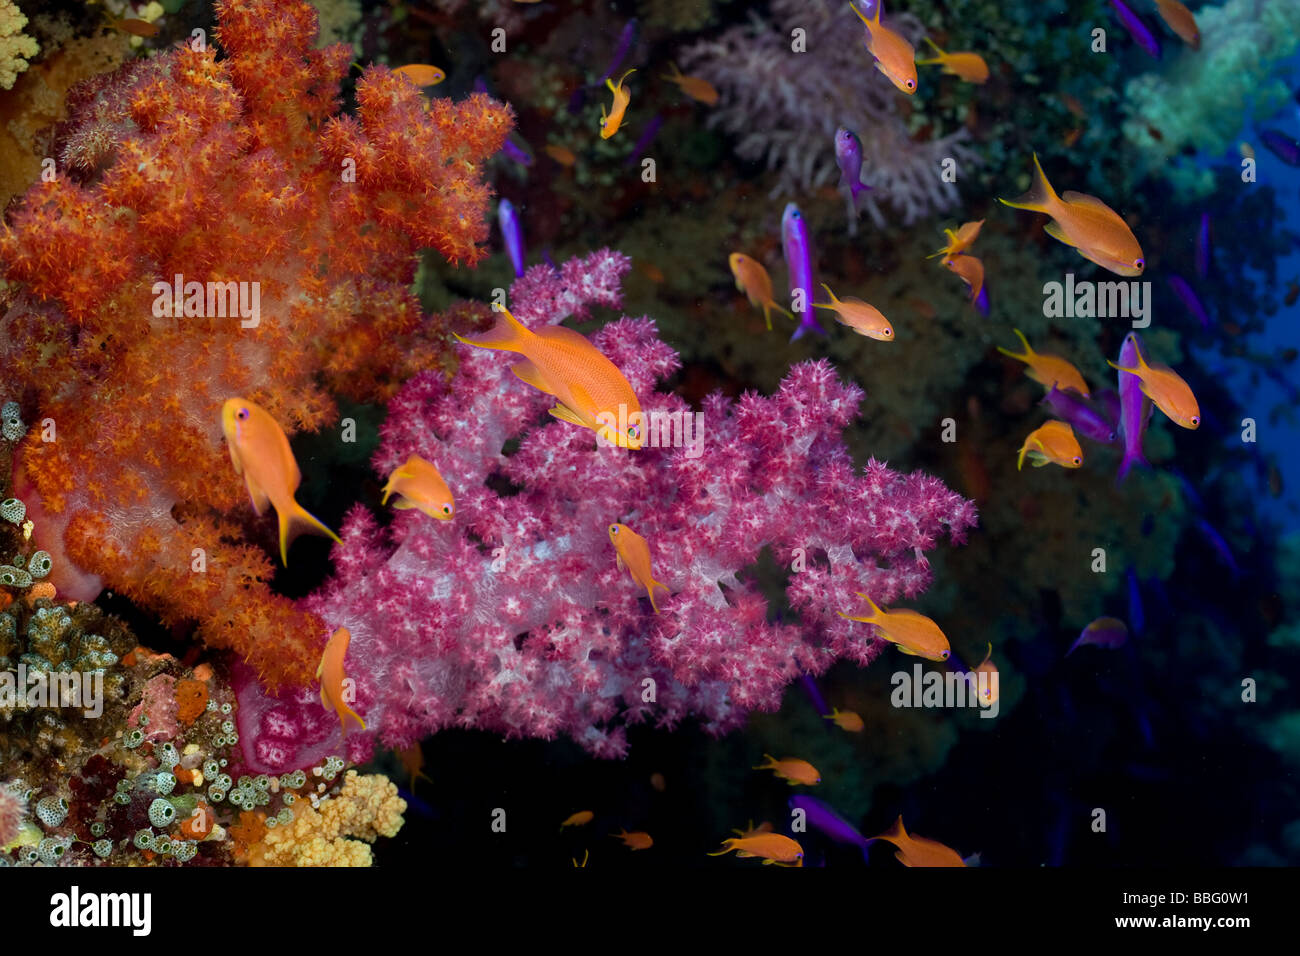 Anthias and soft coral. Stock Photo